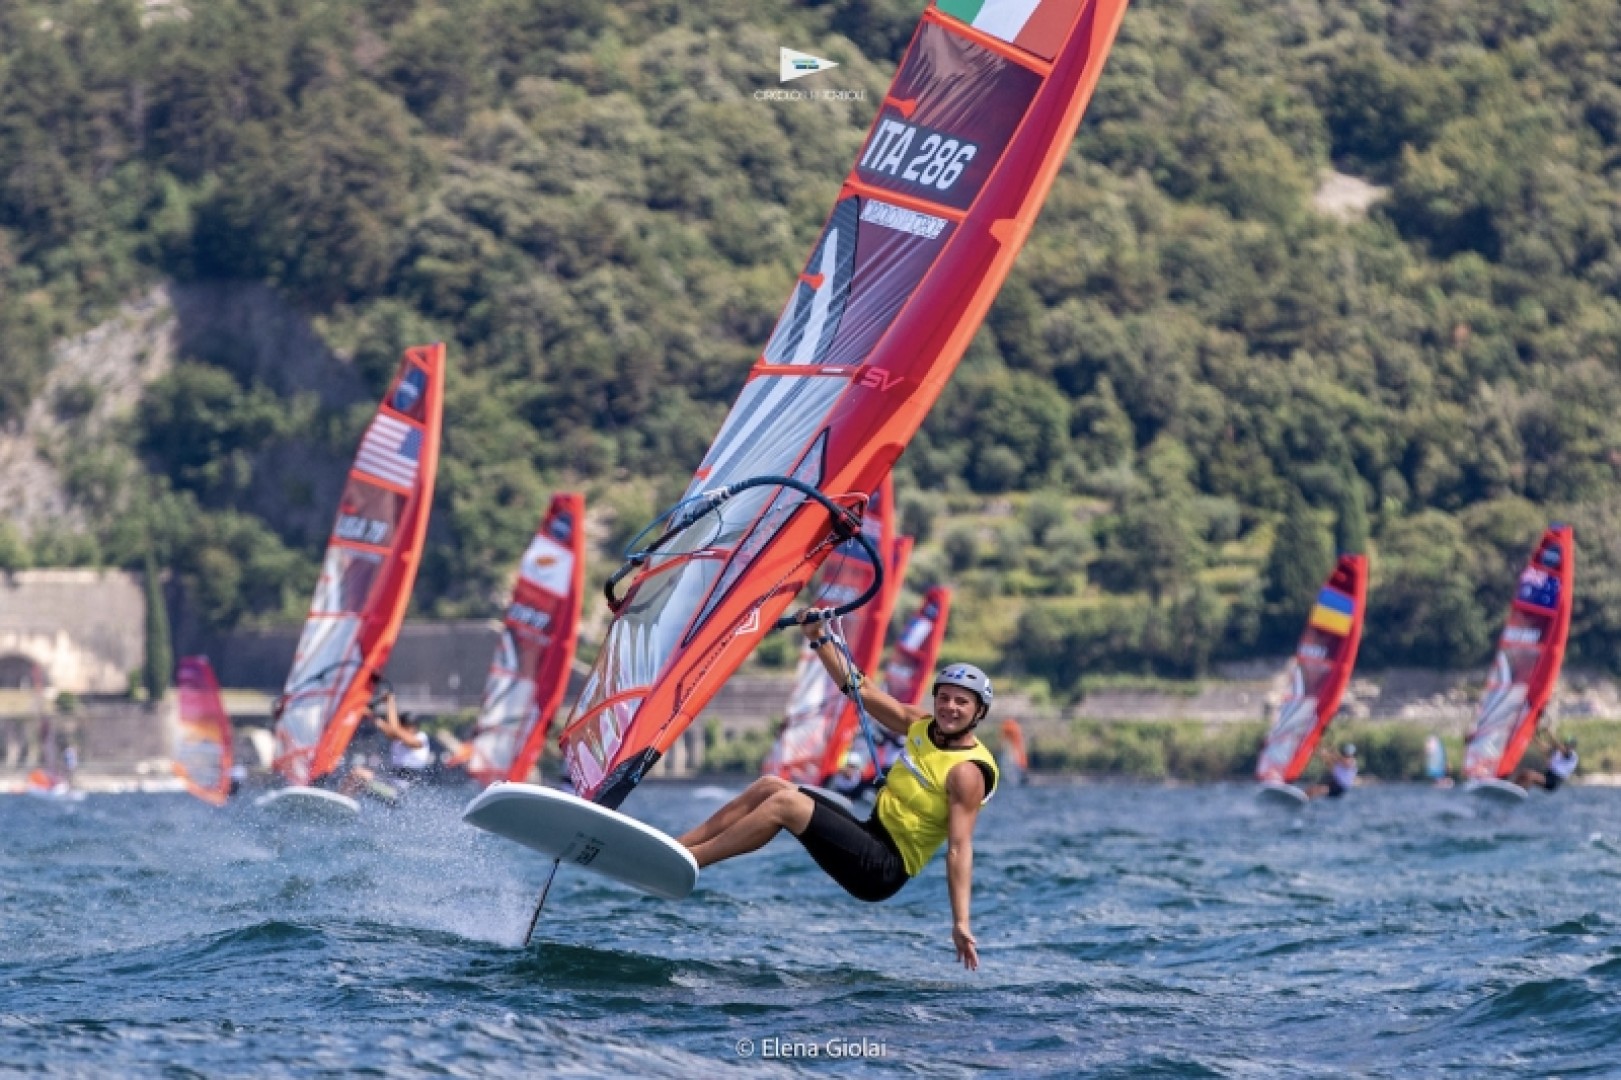 Federico Pilloni, athlete from the Young Azzurra program, is the iQFOil Youth European Champion.

﻿Photo credits: Elena Giolai